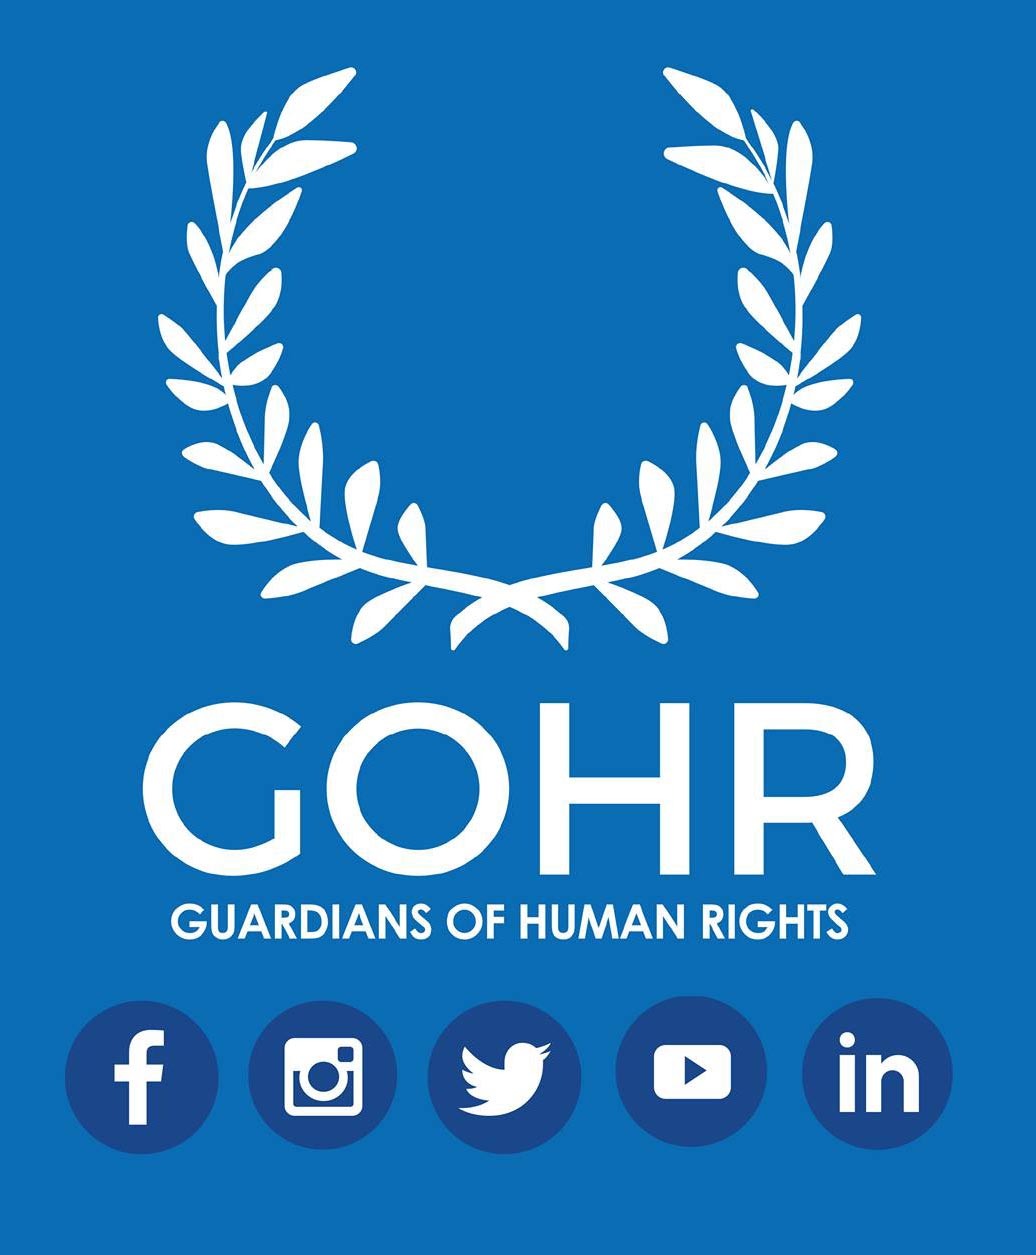 Guardians of Human Rights Foundation delivers their third Democracy and Human Rights Congress 2022 at the Florida International University (FIU).